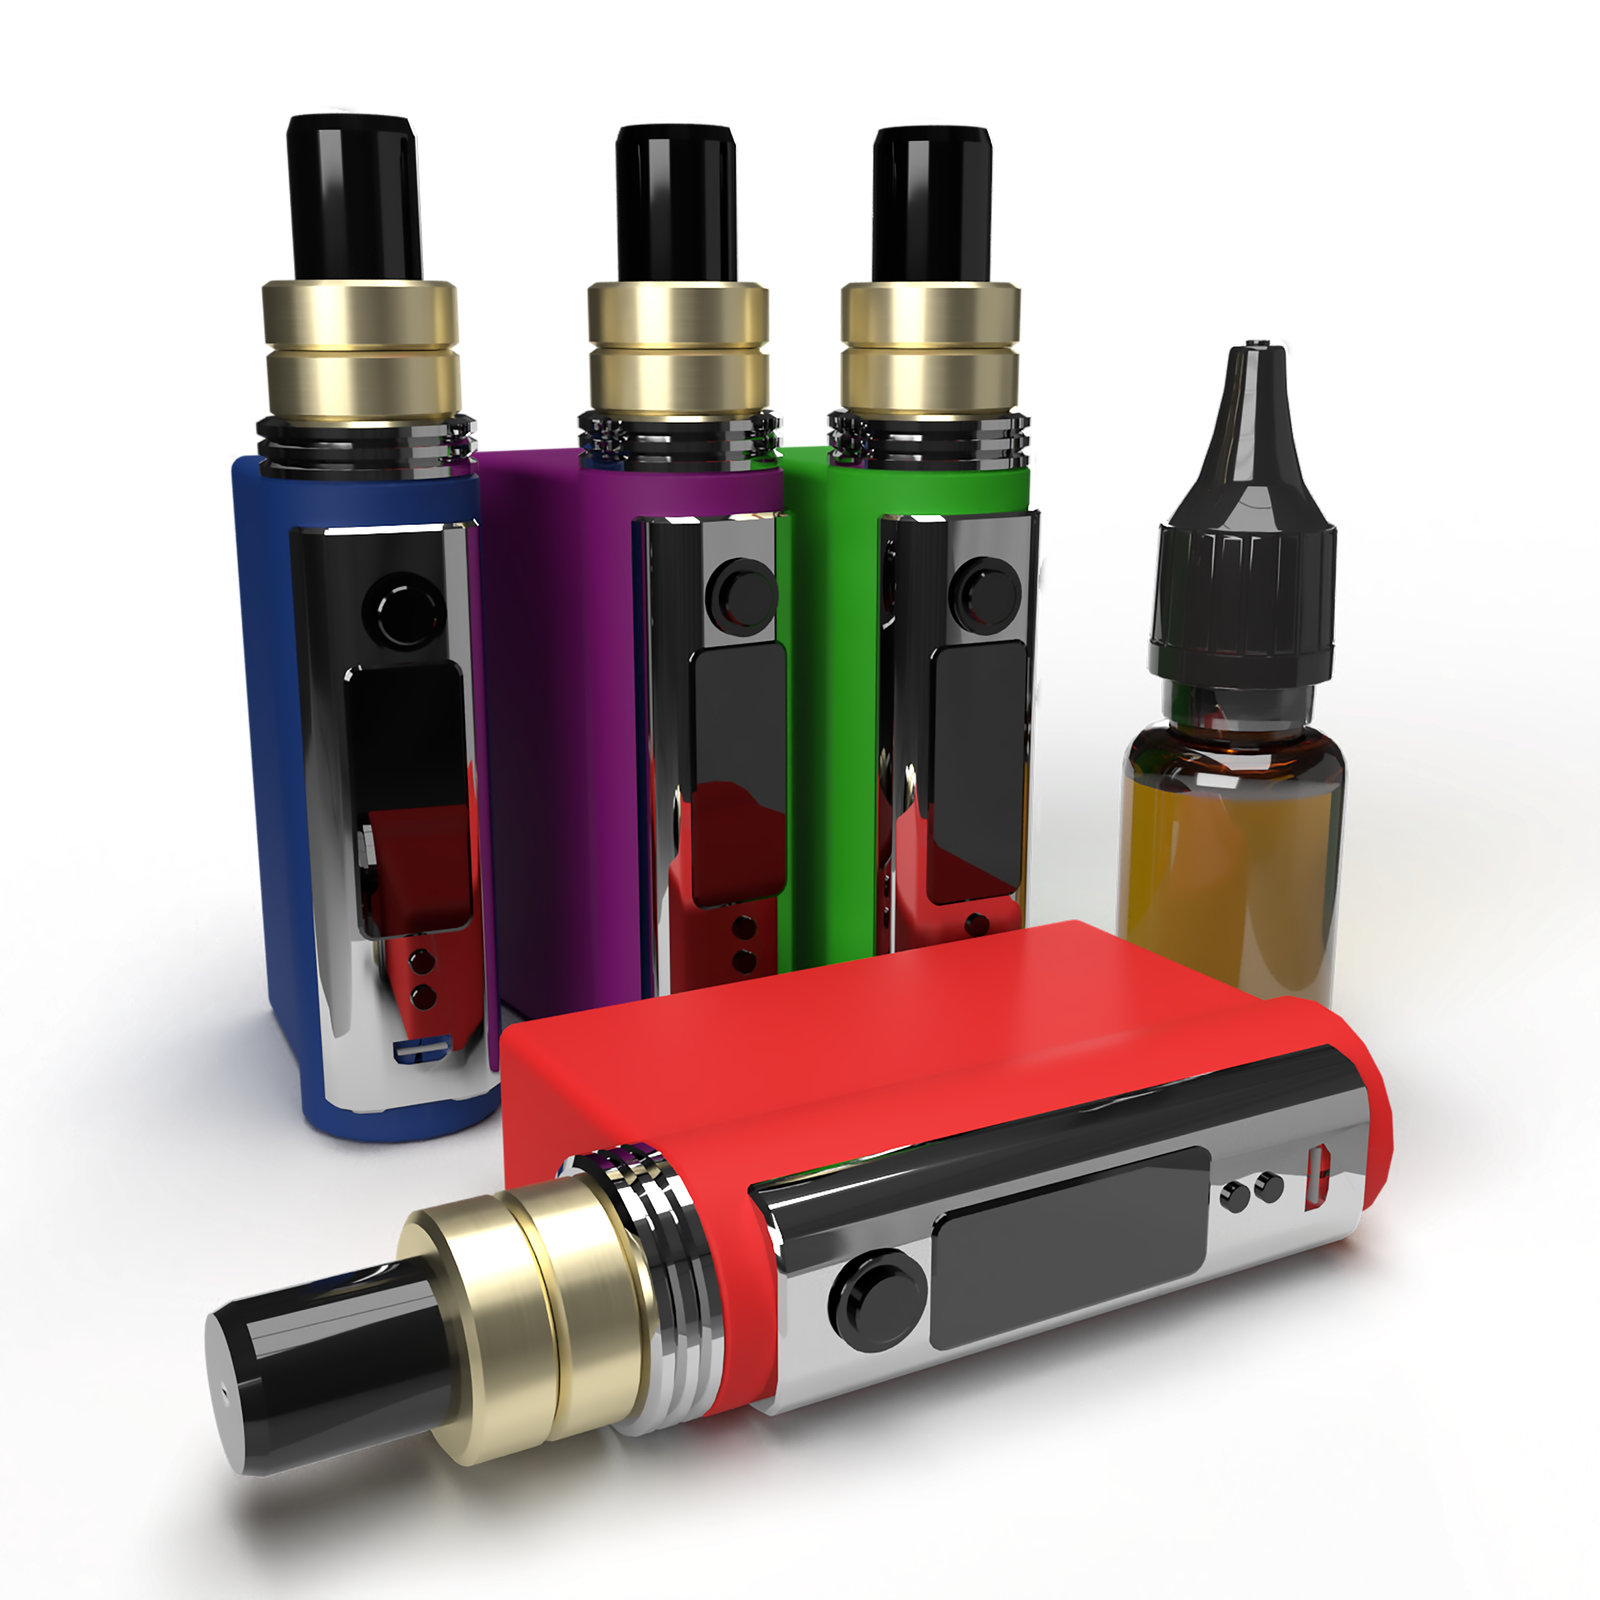 vecteezy 3d collection of colorful vapes with liquid bottles 9875193 425